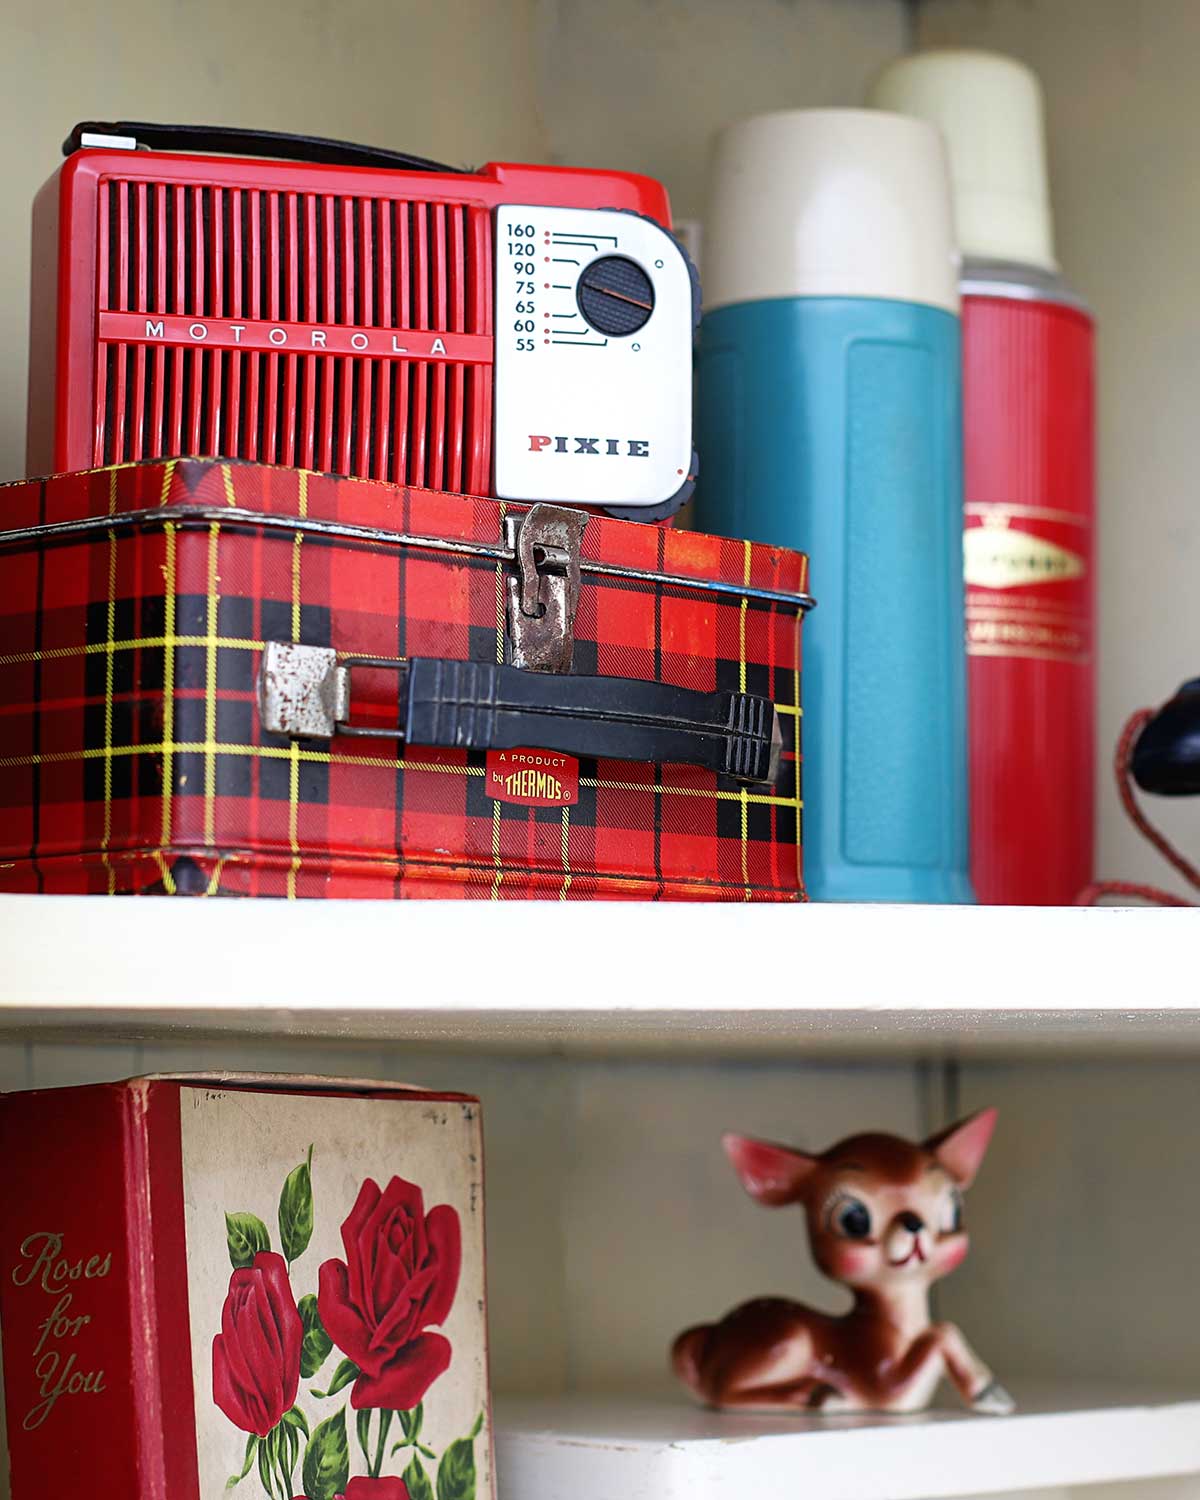 A red Motorola Pixie radio, vintage plaid school Thermos lunchbox and thermoses